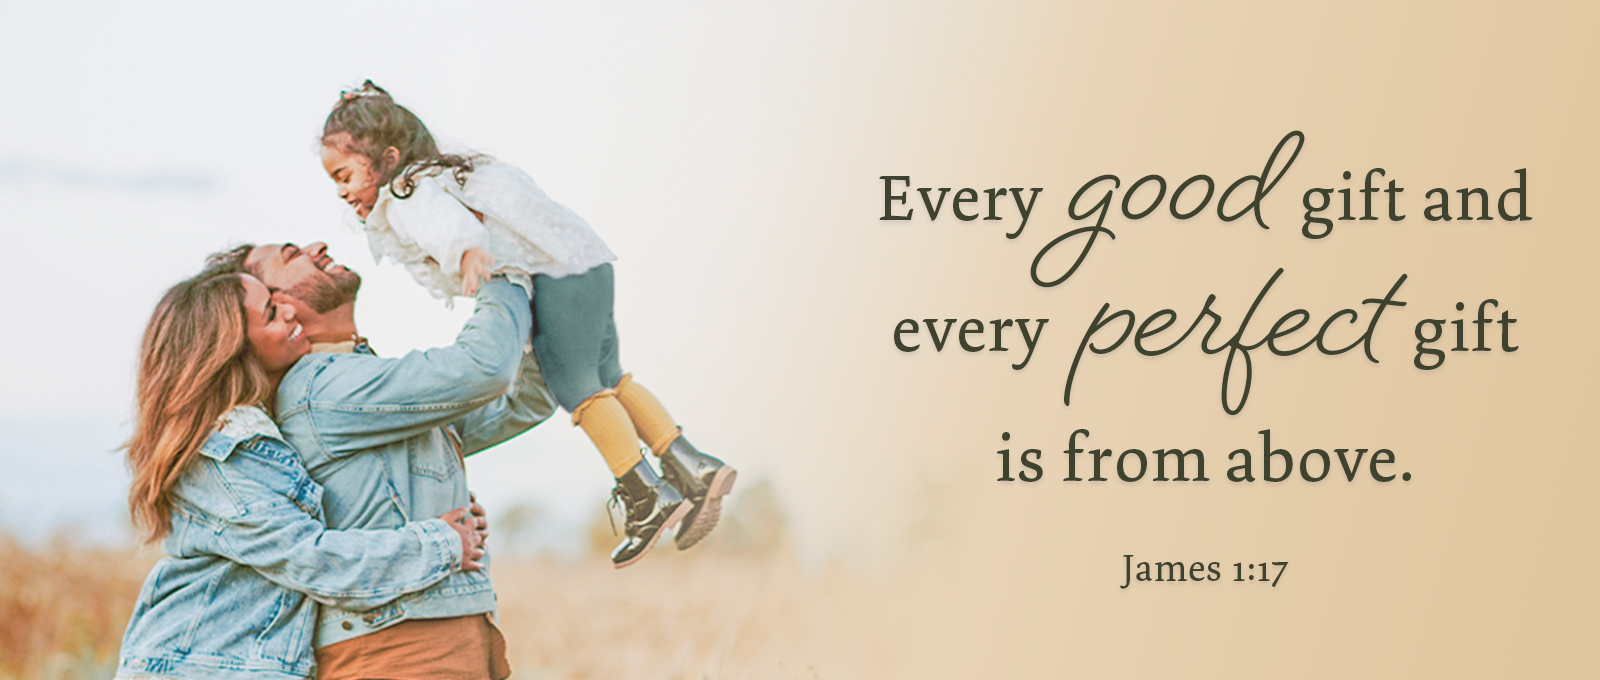 May 1-26 verse slider - Every good gift and every perfect gift is from above.